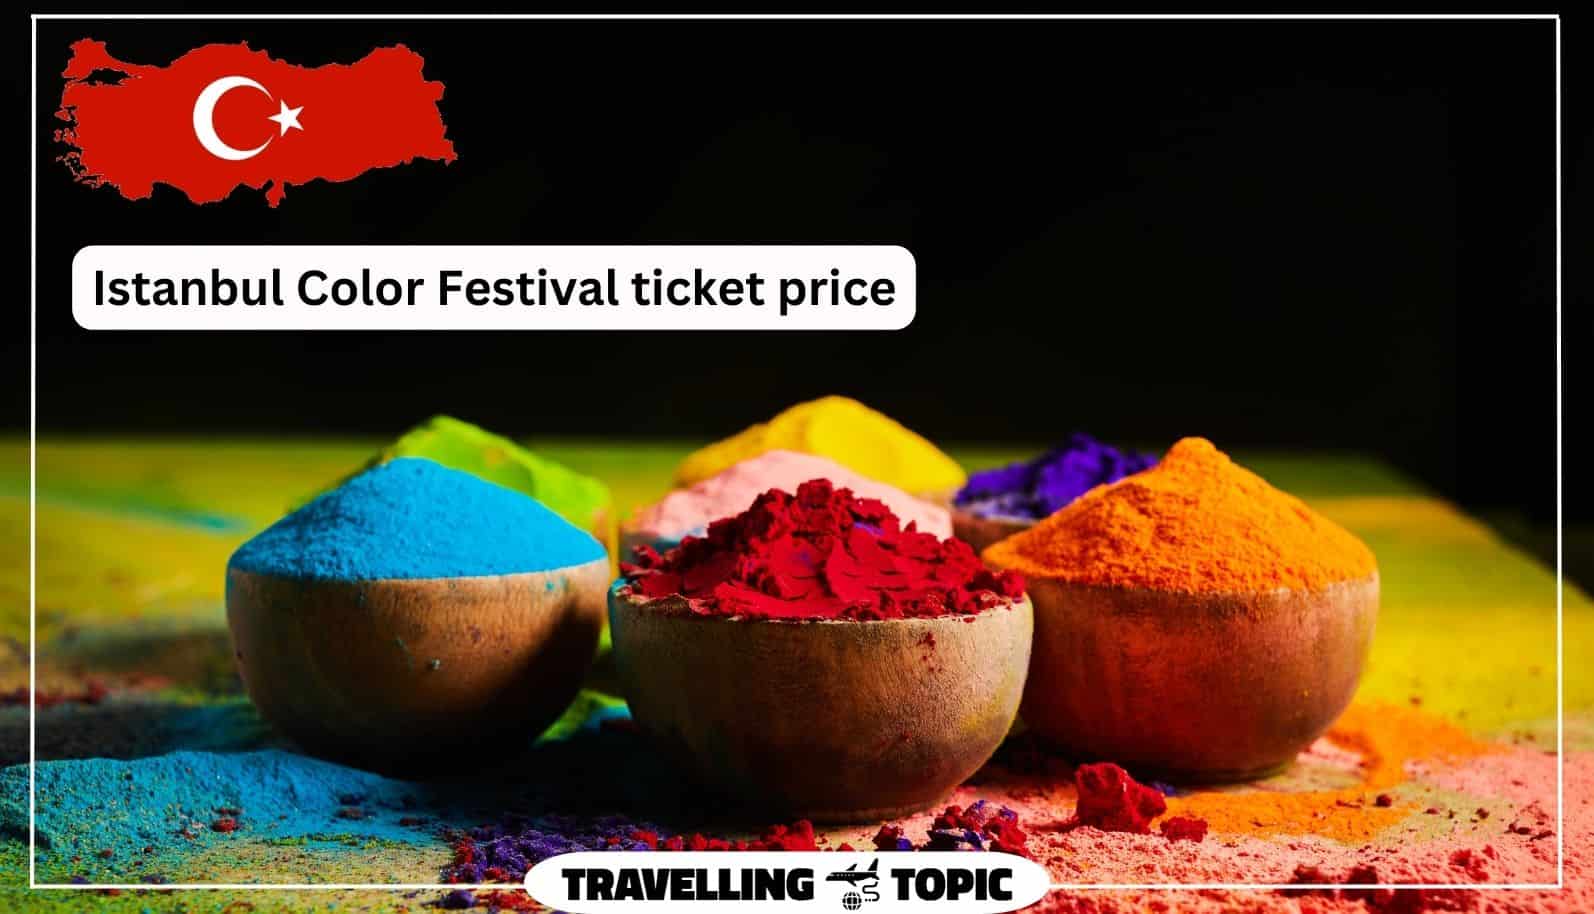 Istanbul Color Festival ticket price